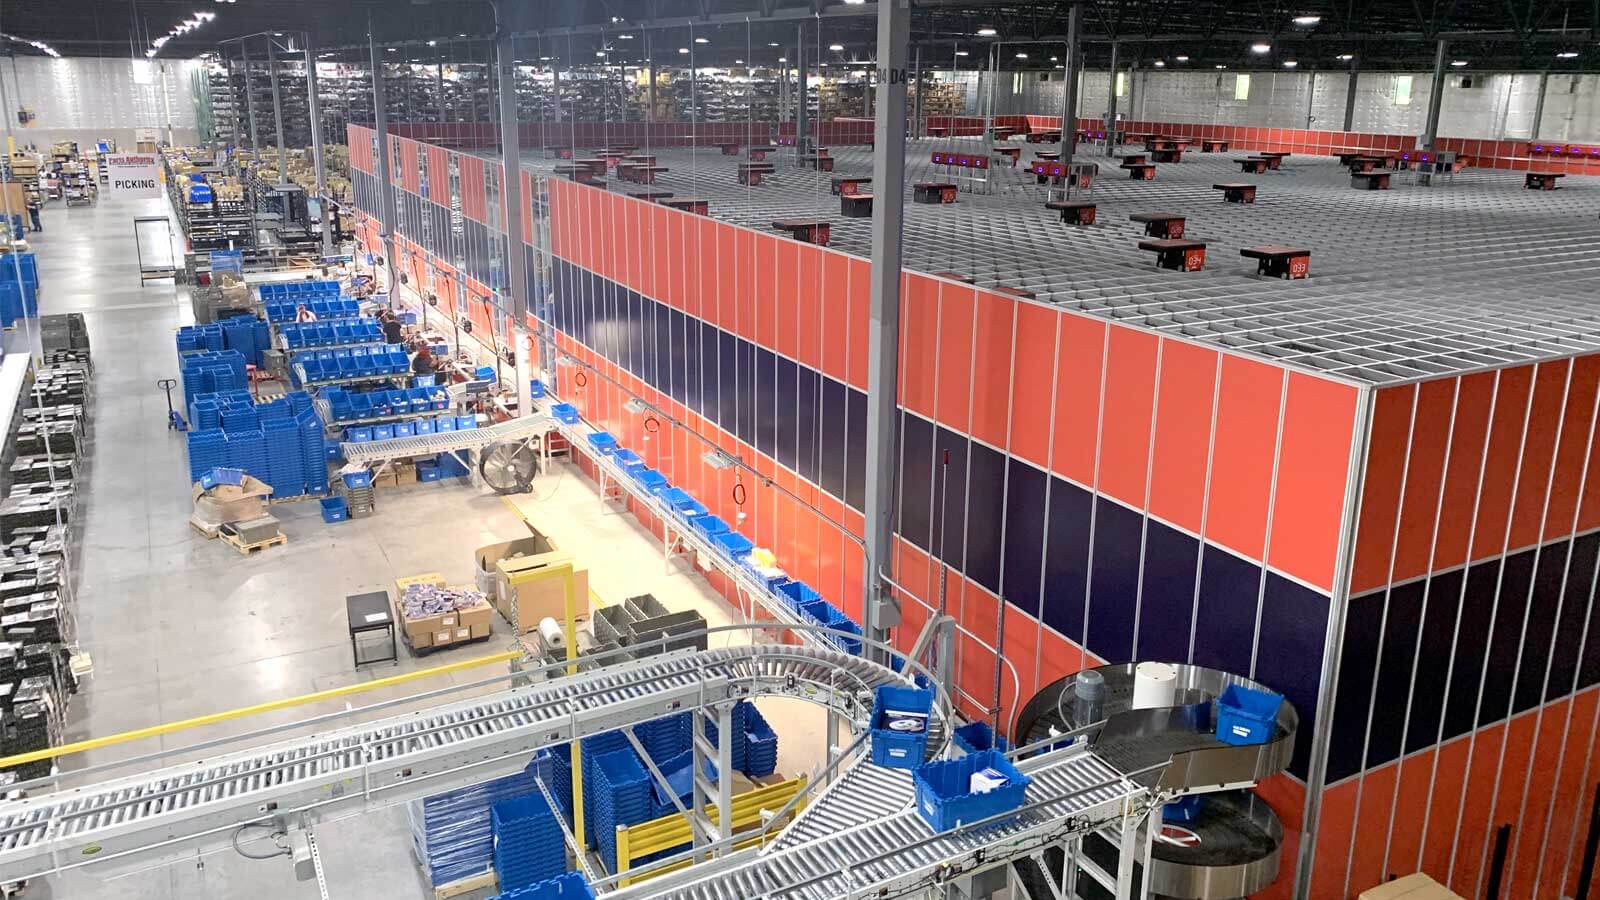 ASRS and Conveyor lines in retail order fulfillment operation